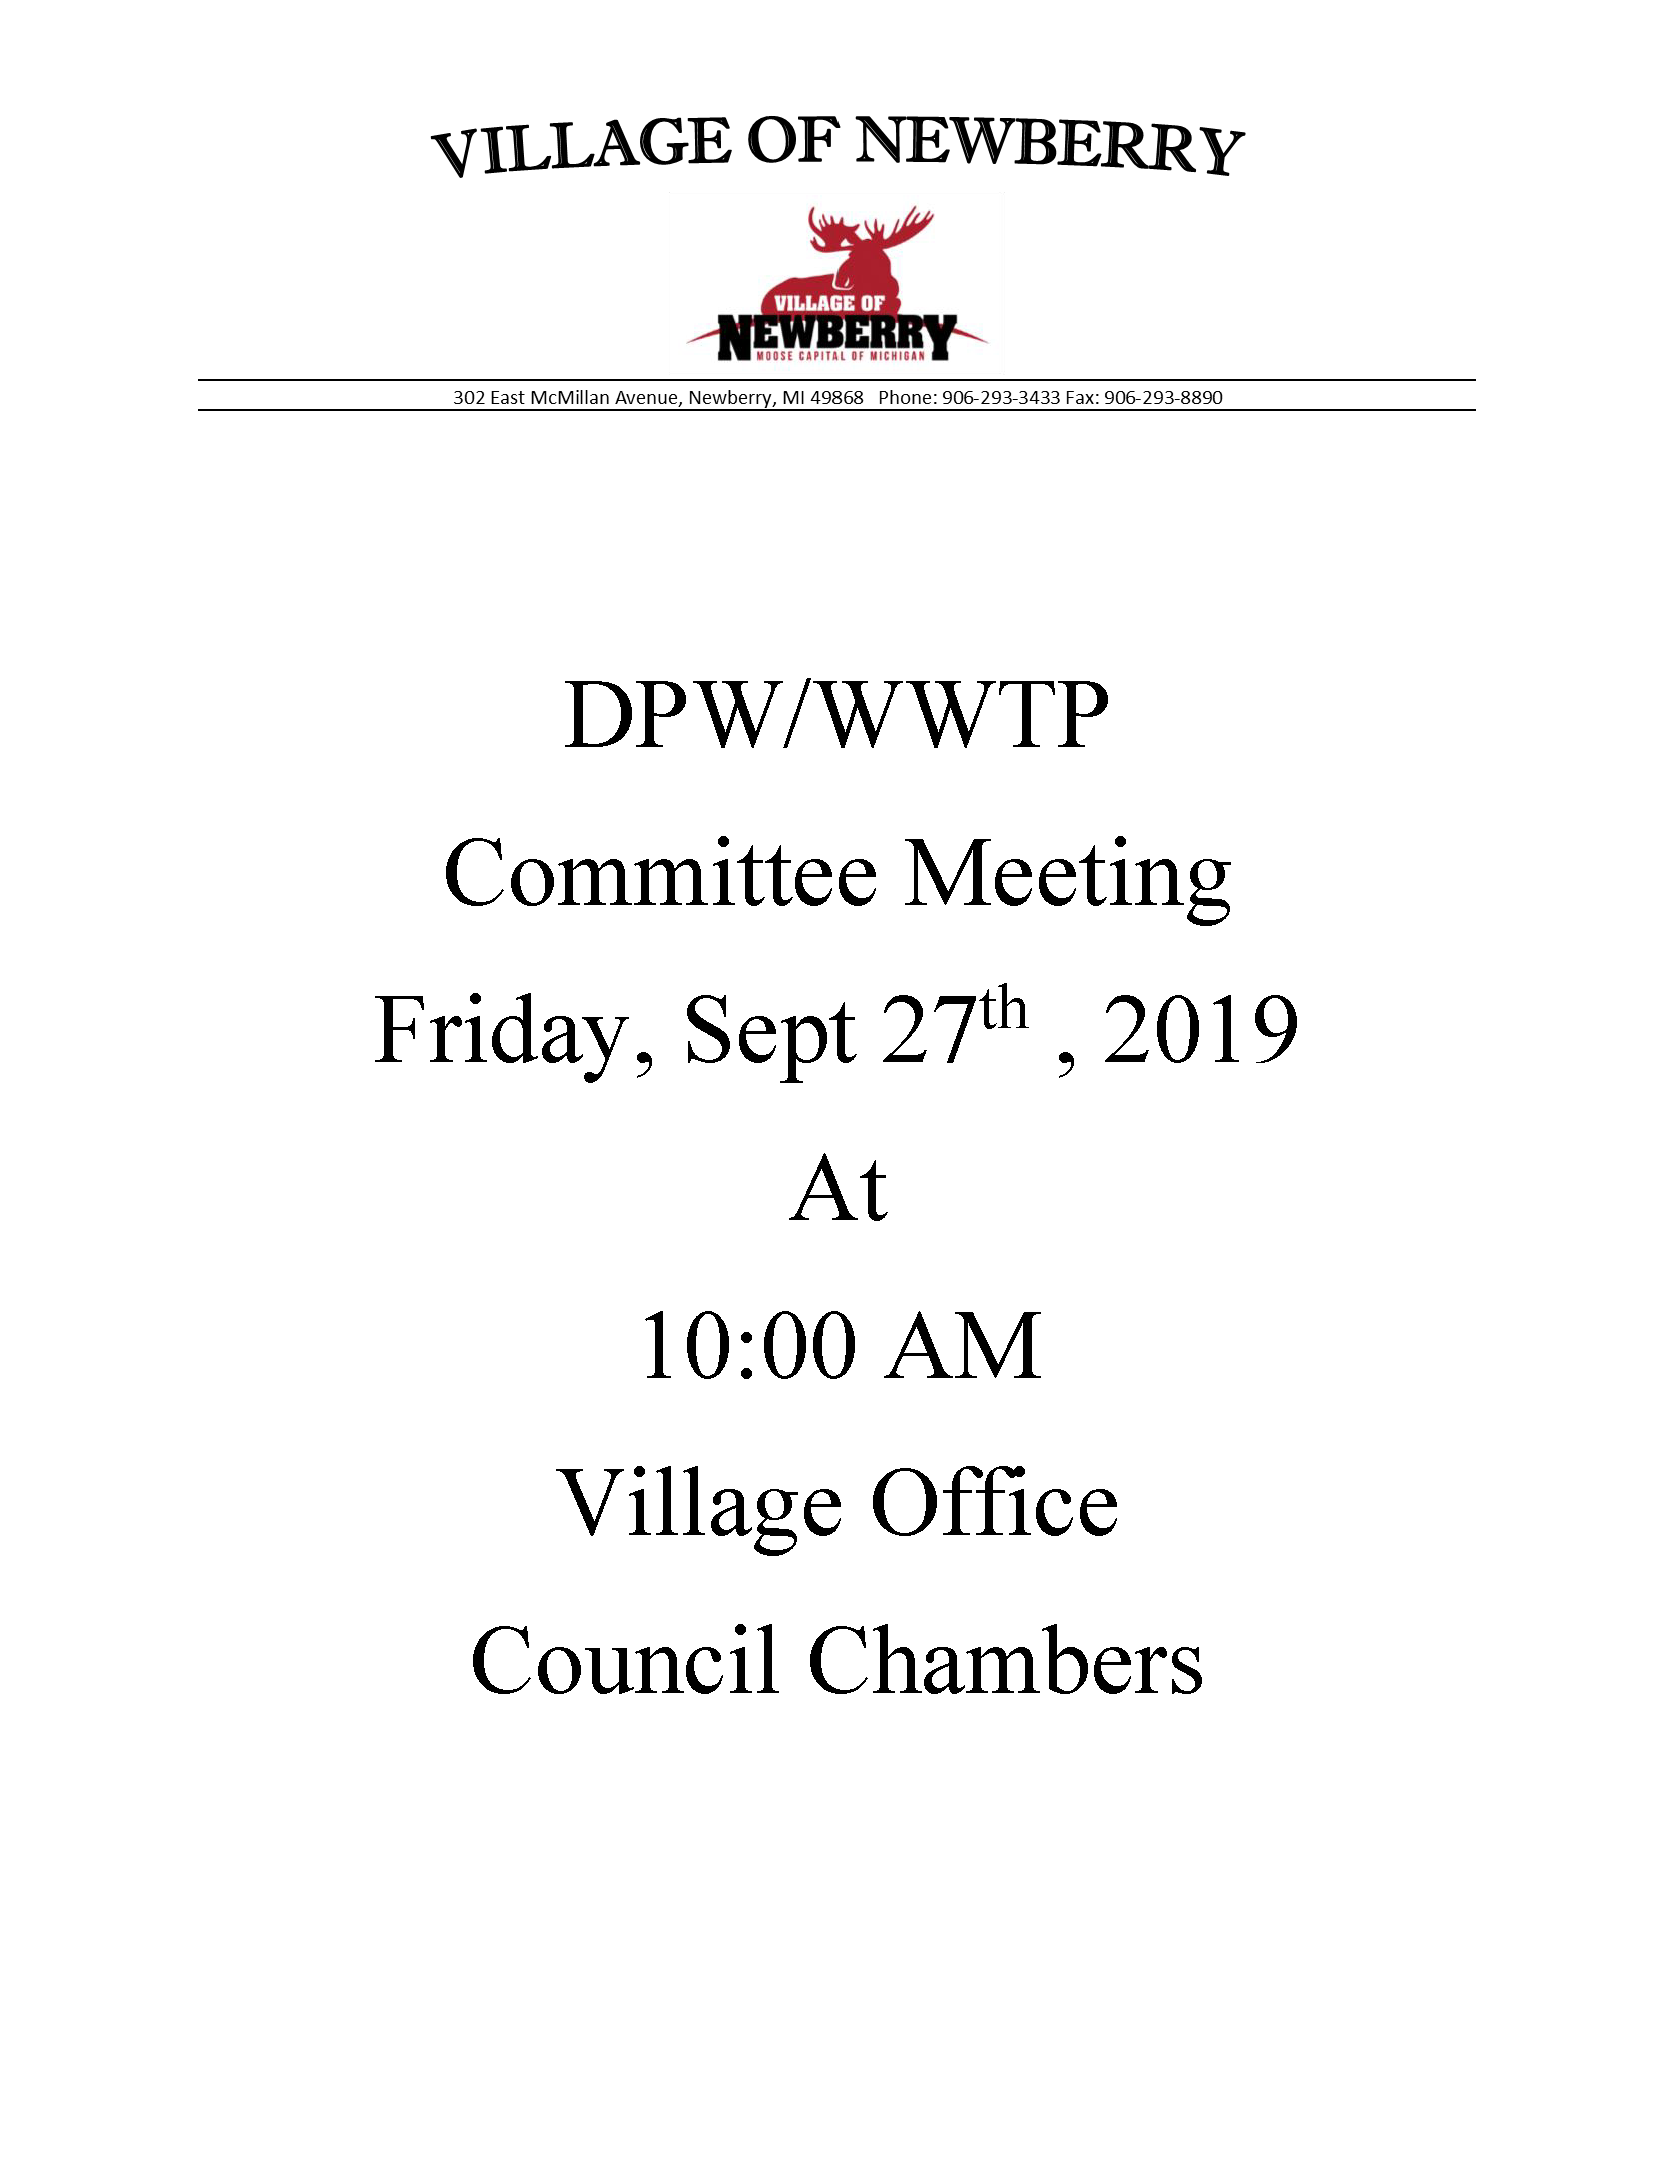 DPW-WWTP Committe Meeting 9-27-19